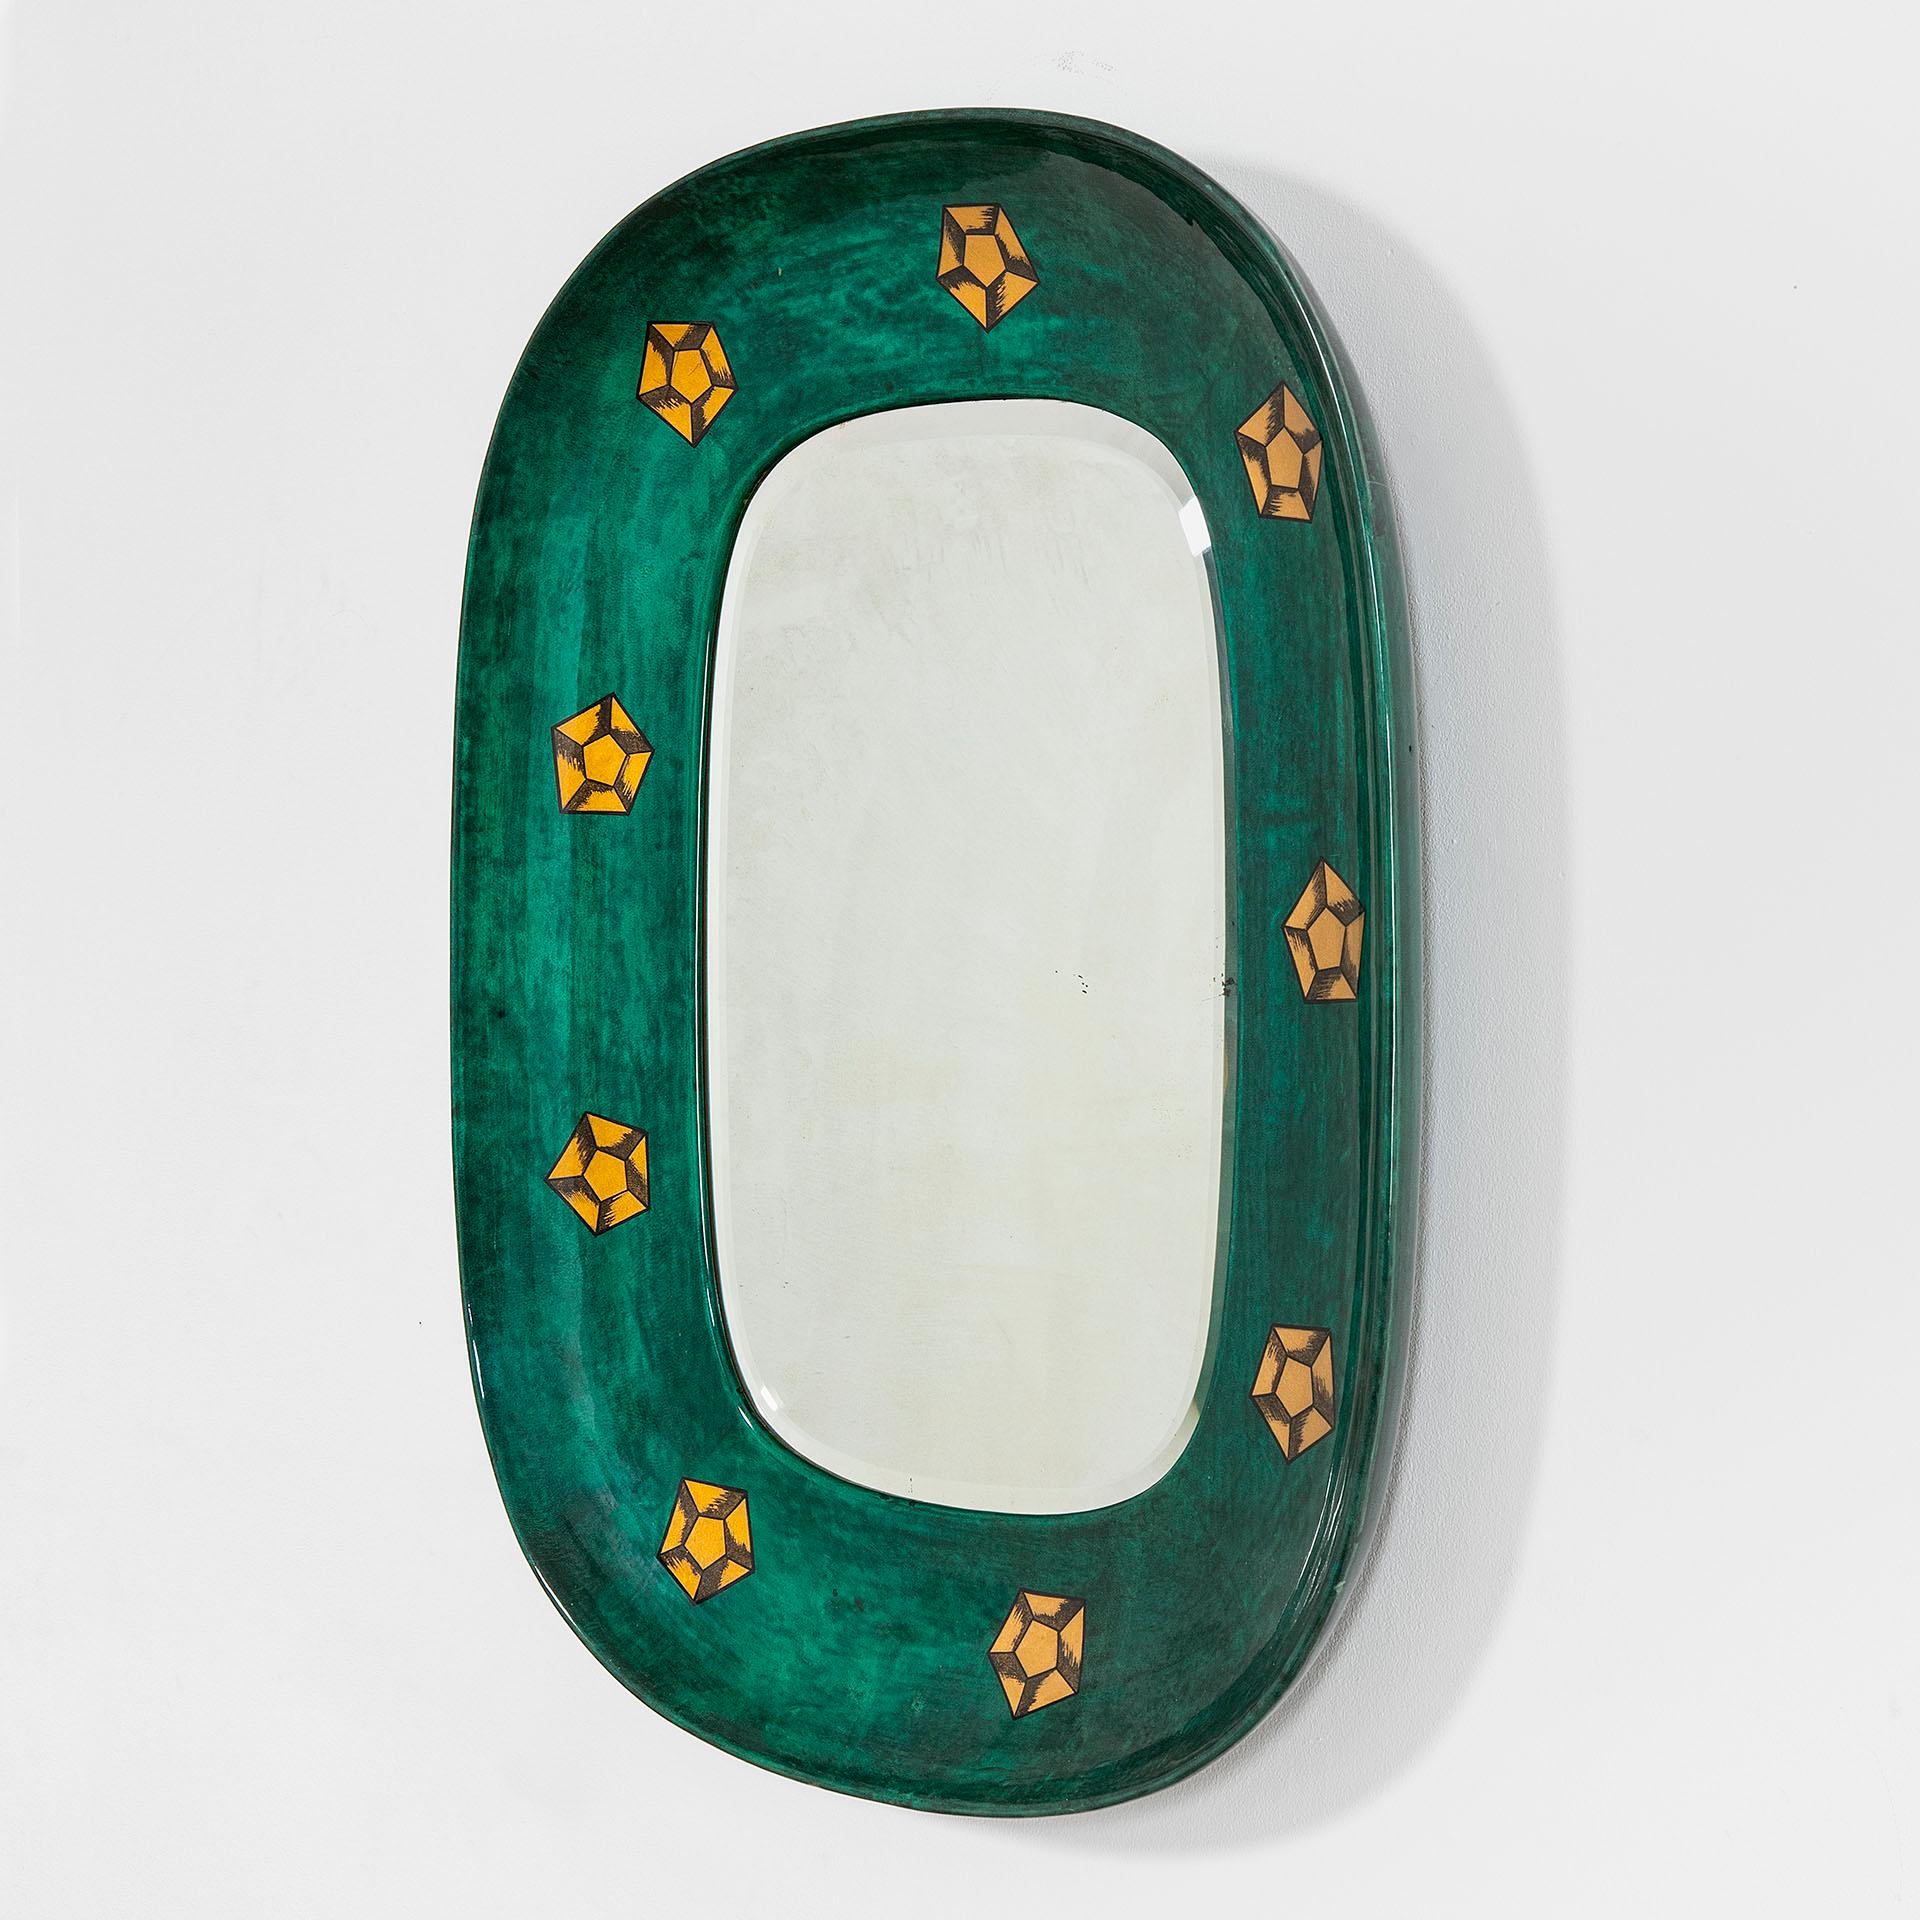 Mid-Century Modern 20th Century Aldo Tura Wall Mirror with Resin Coat, Wood and Paper Motifs, 1950s For Sale